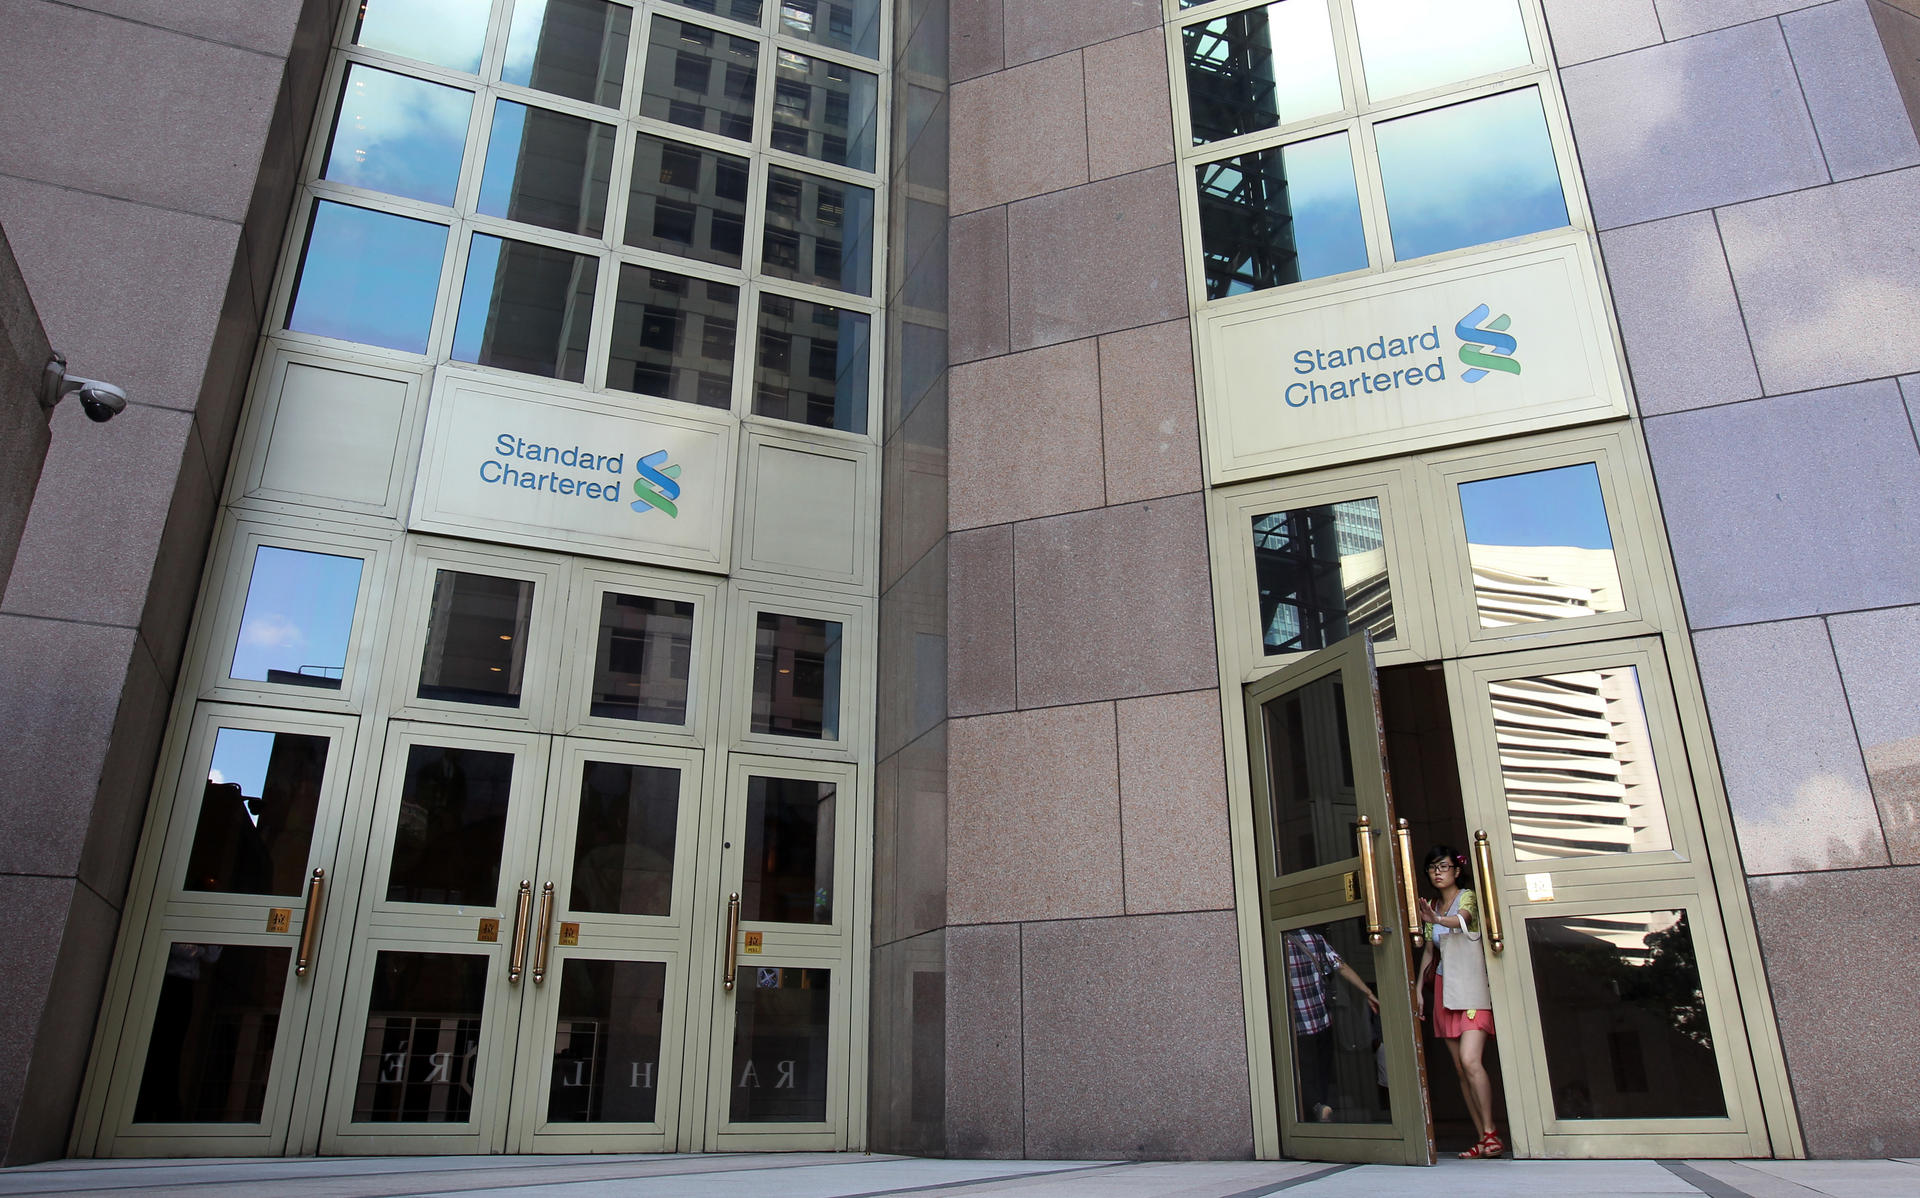 Standard Chartered plans to focus on areas that could offer higher profit and growth. Photo: Dickson Lee